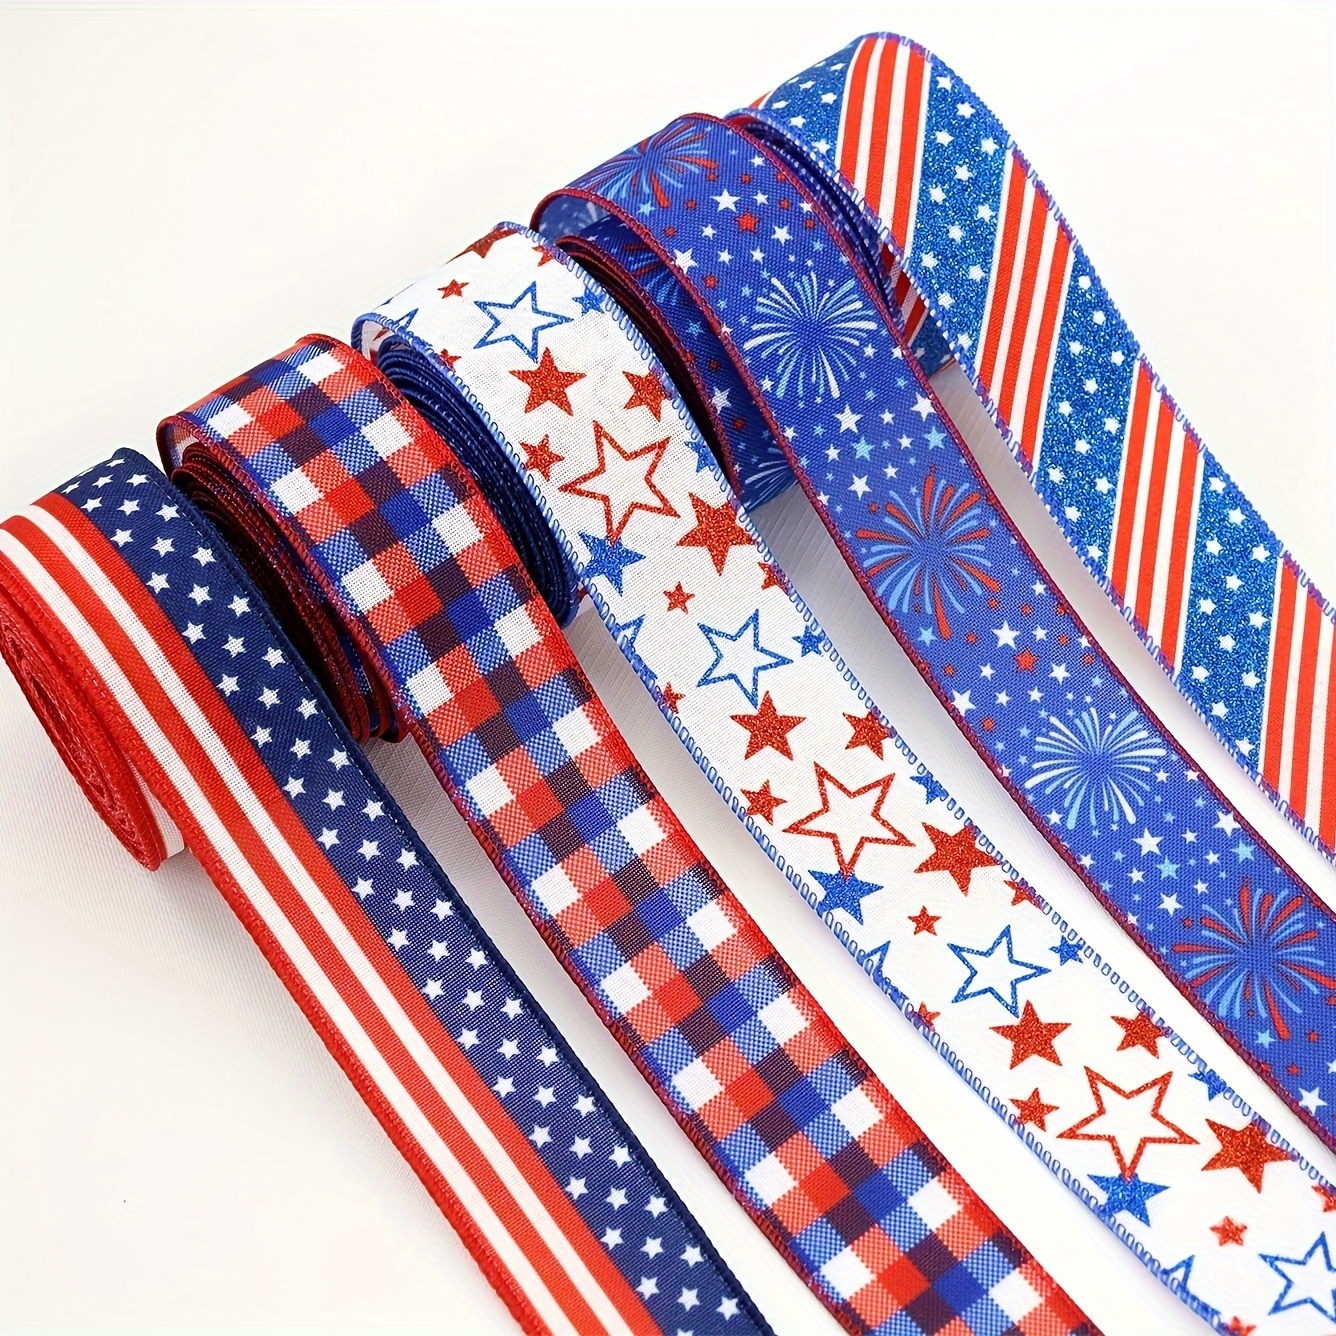 

1 Roll, 5 Yards Patriotic Ribbon 4th Of July Stars And Stripes Burlap Wired Edge Ribbon White Blue Red Decorative Ribbon For Independence Day Gift Wrapping Diy Wreath Bow Craft Sewing